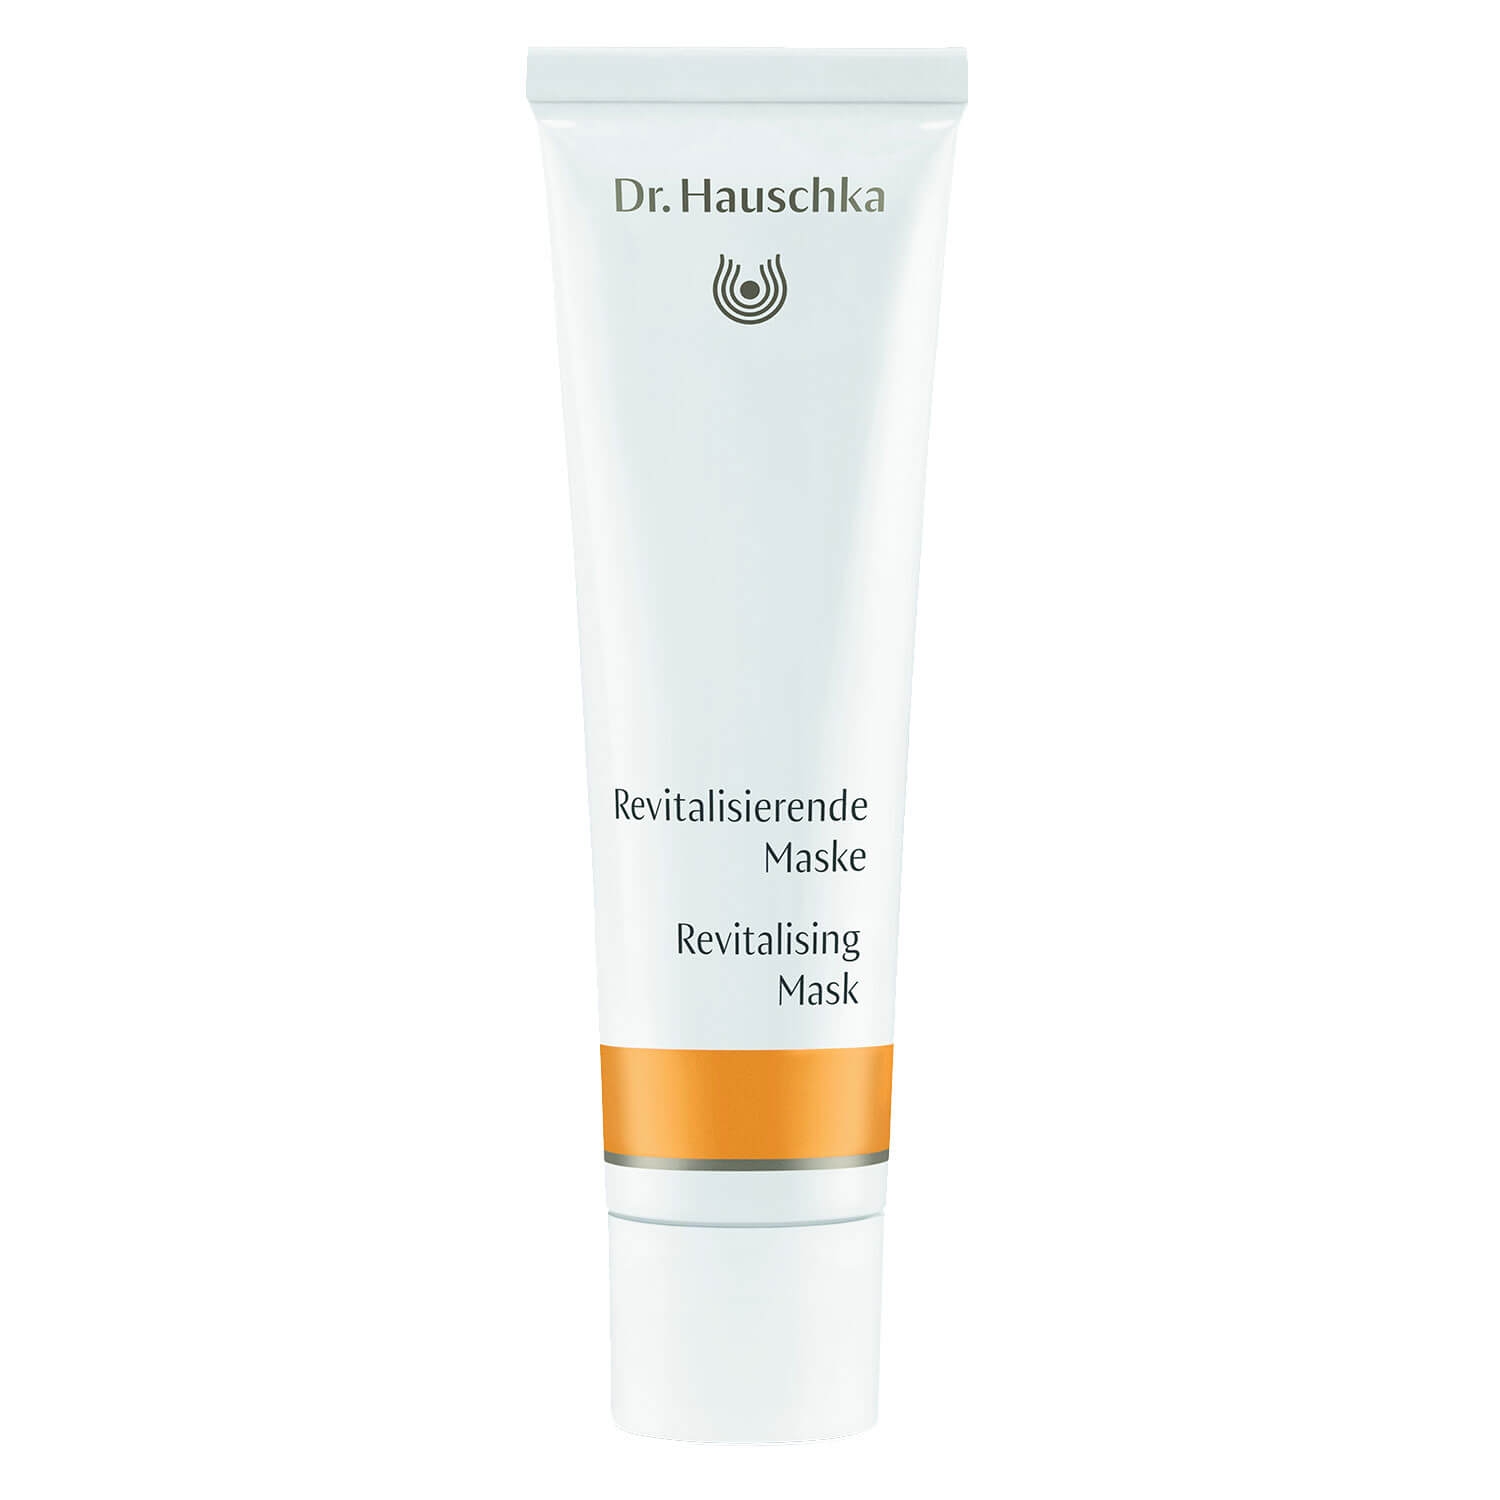 Product image from Dr. Hauschka - Revitalisierende Maske